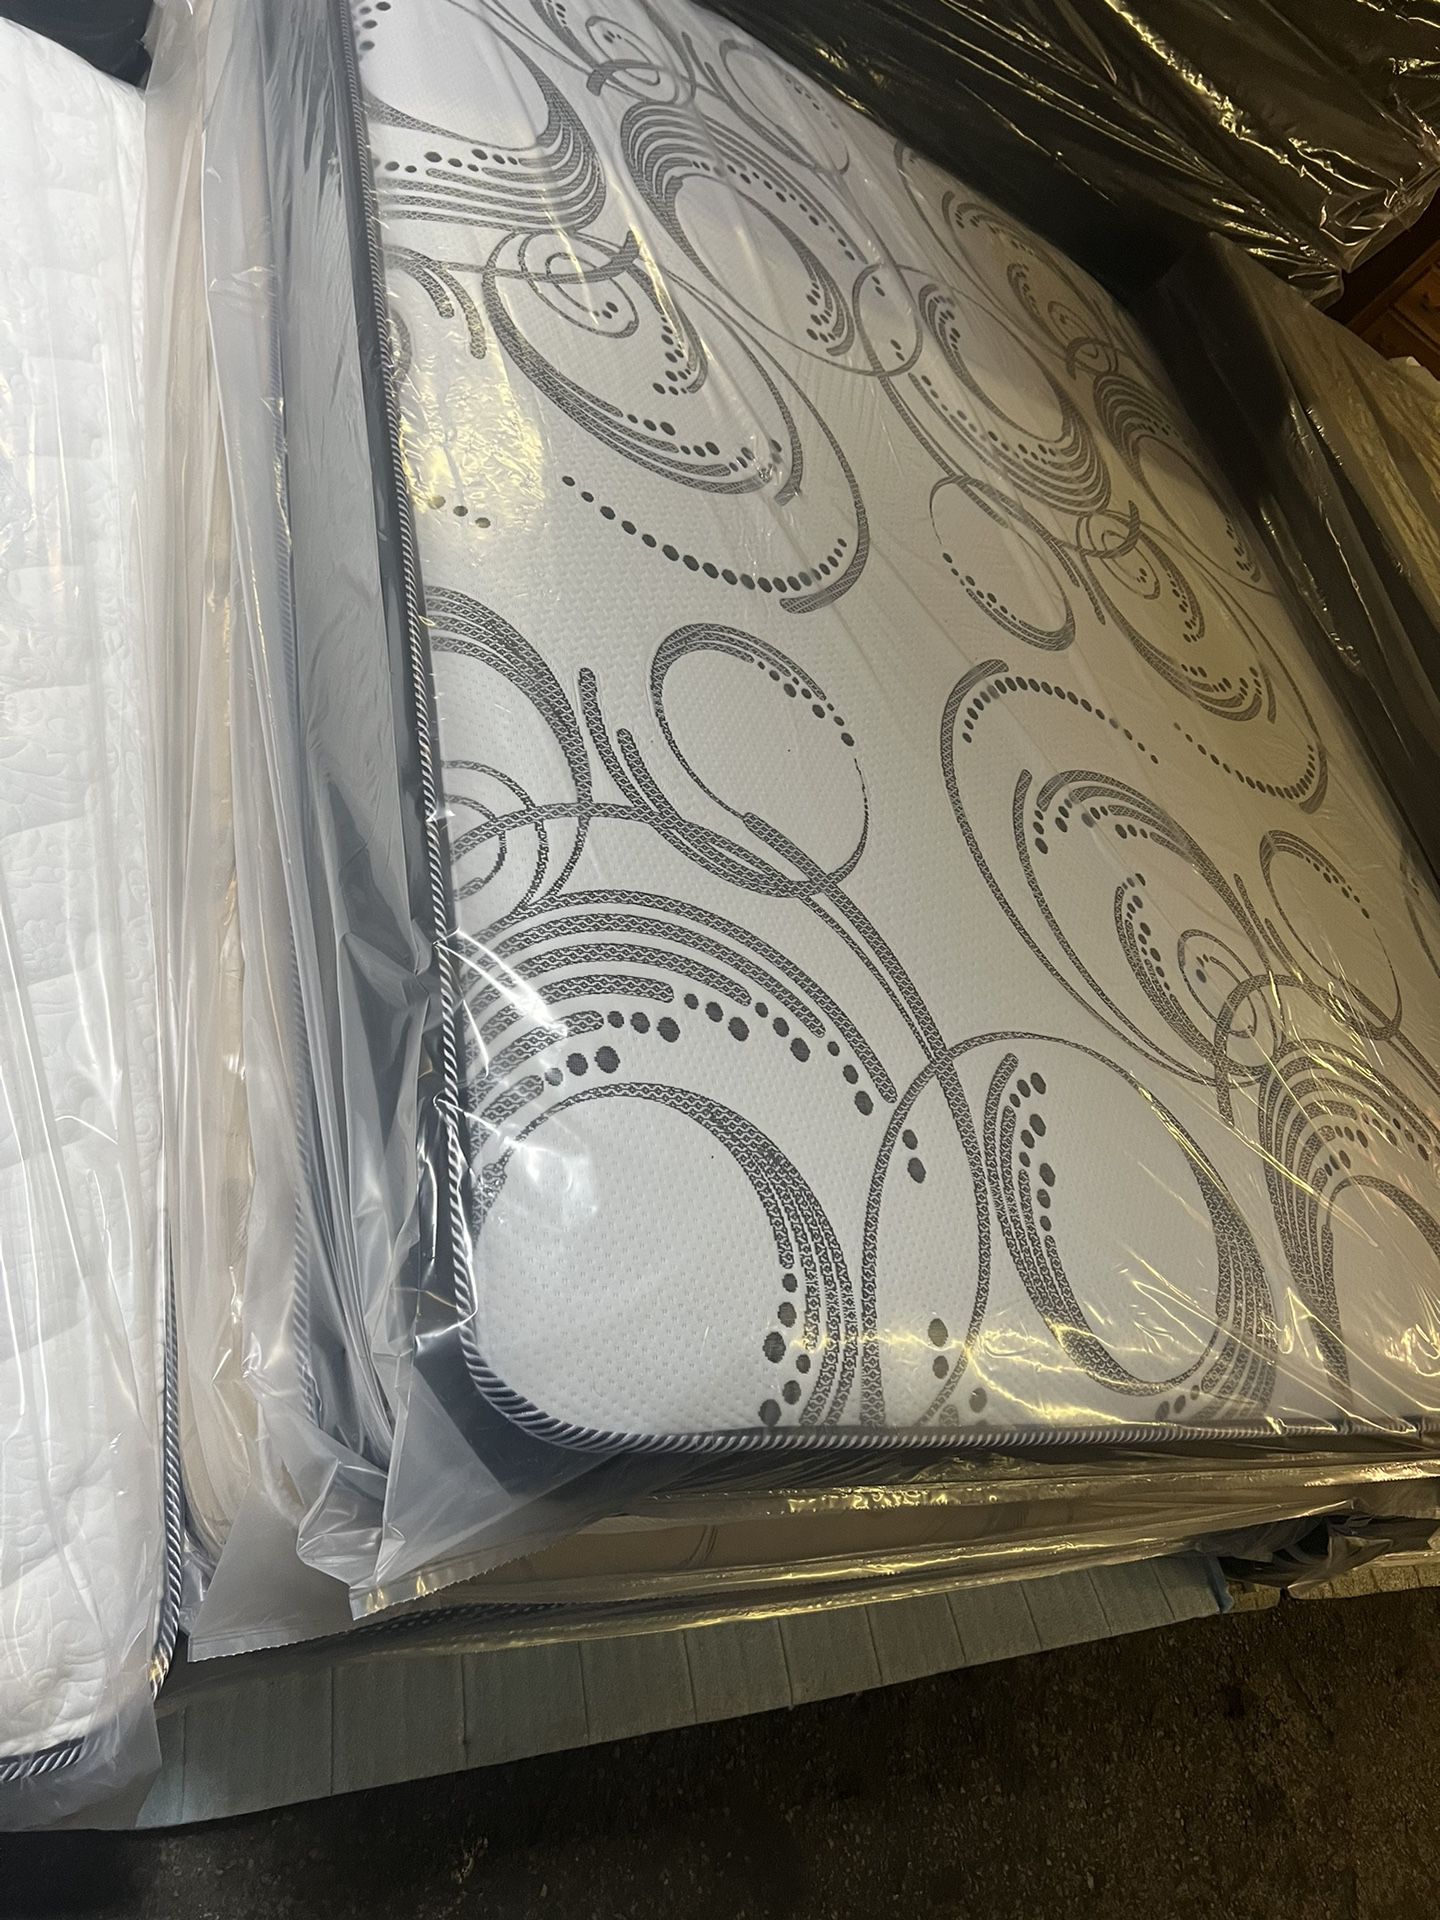 Bed Special. $99 New Standard Mattress Sets. Twin, Full Or Queen. Free Boxspring Included